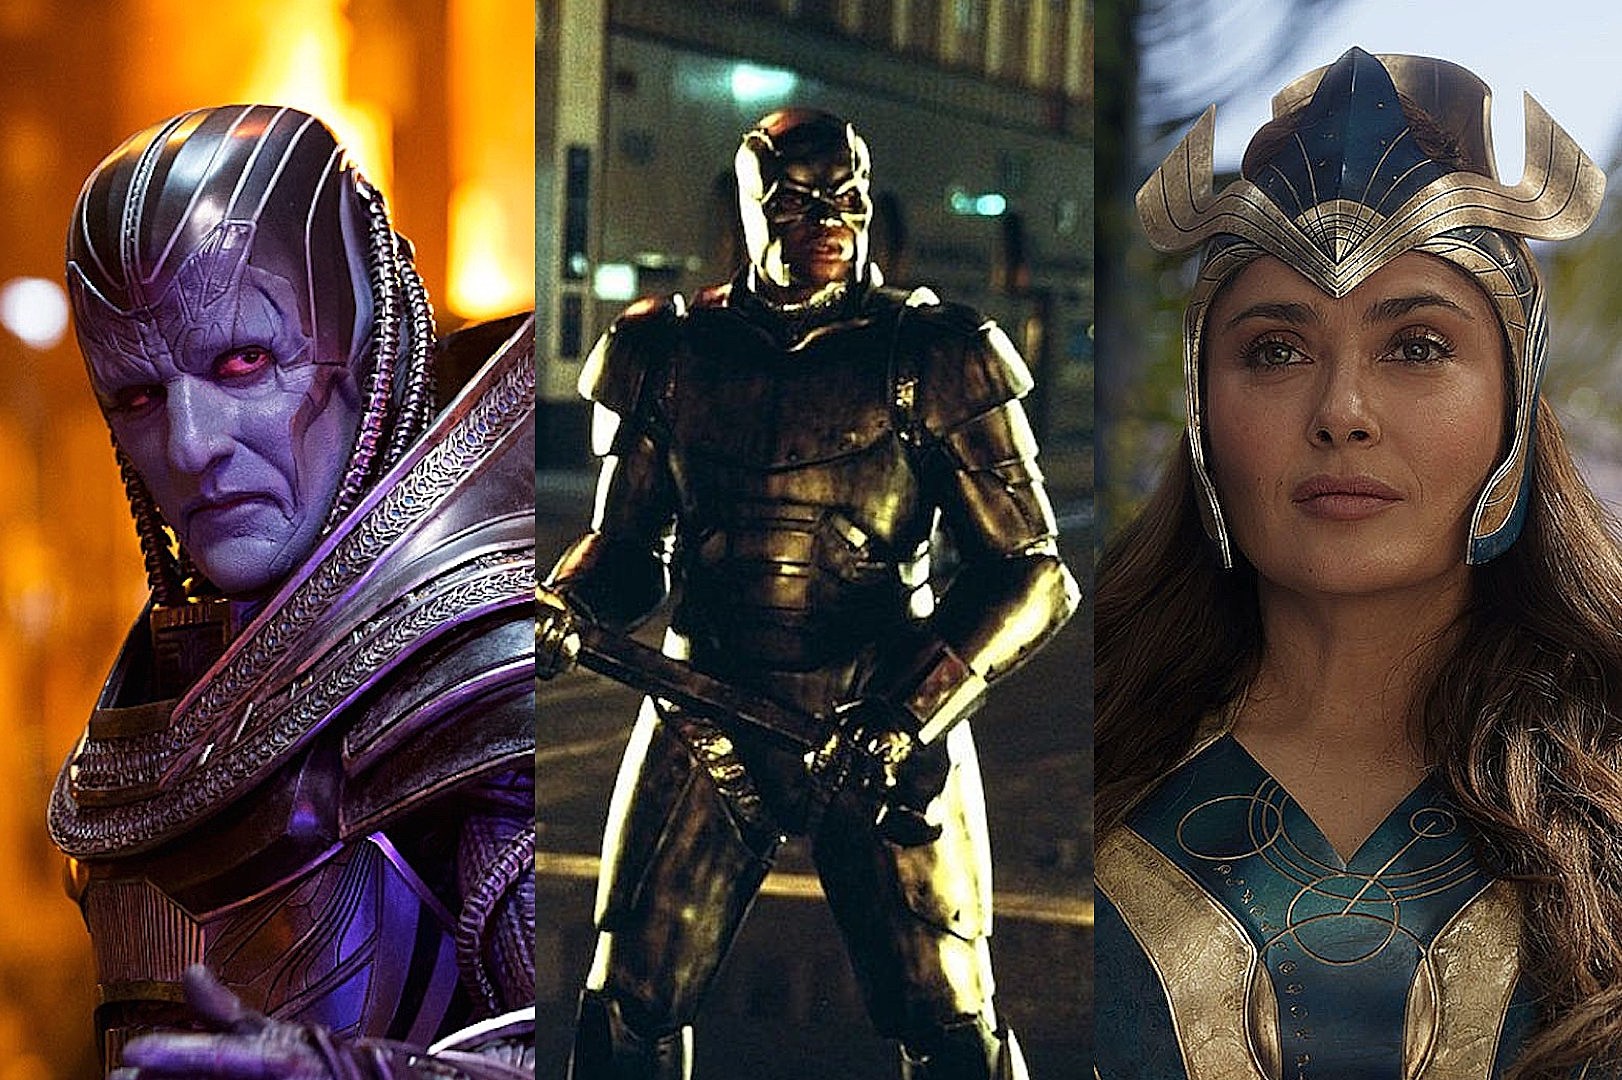 With Great Power: The Rise of Superhero Cinema - WSJ